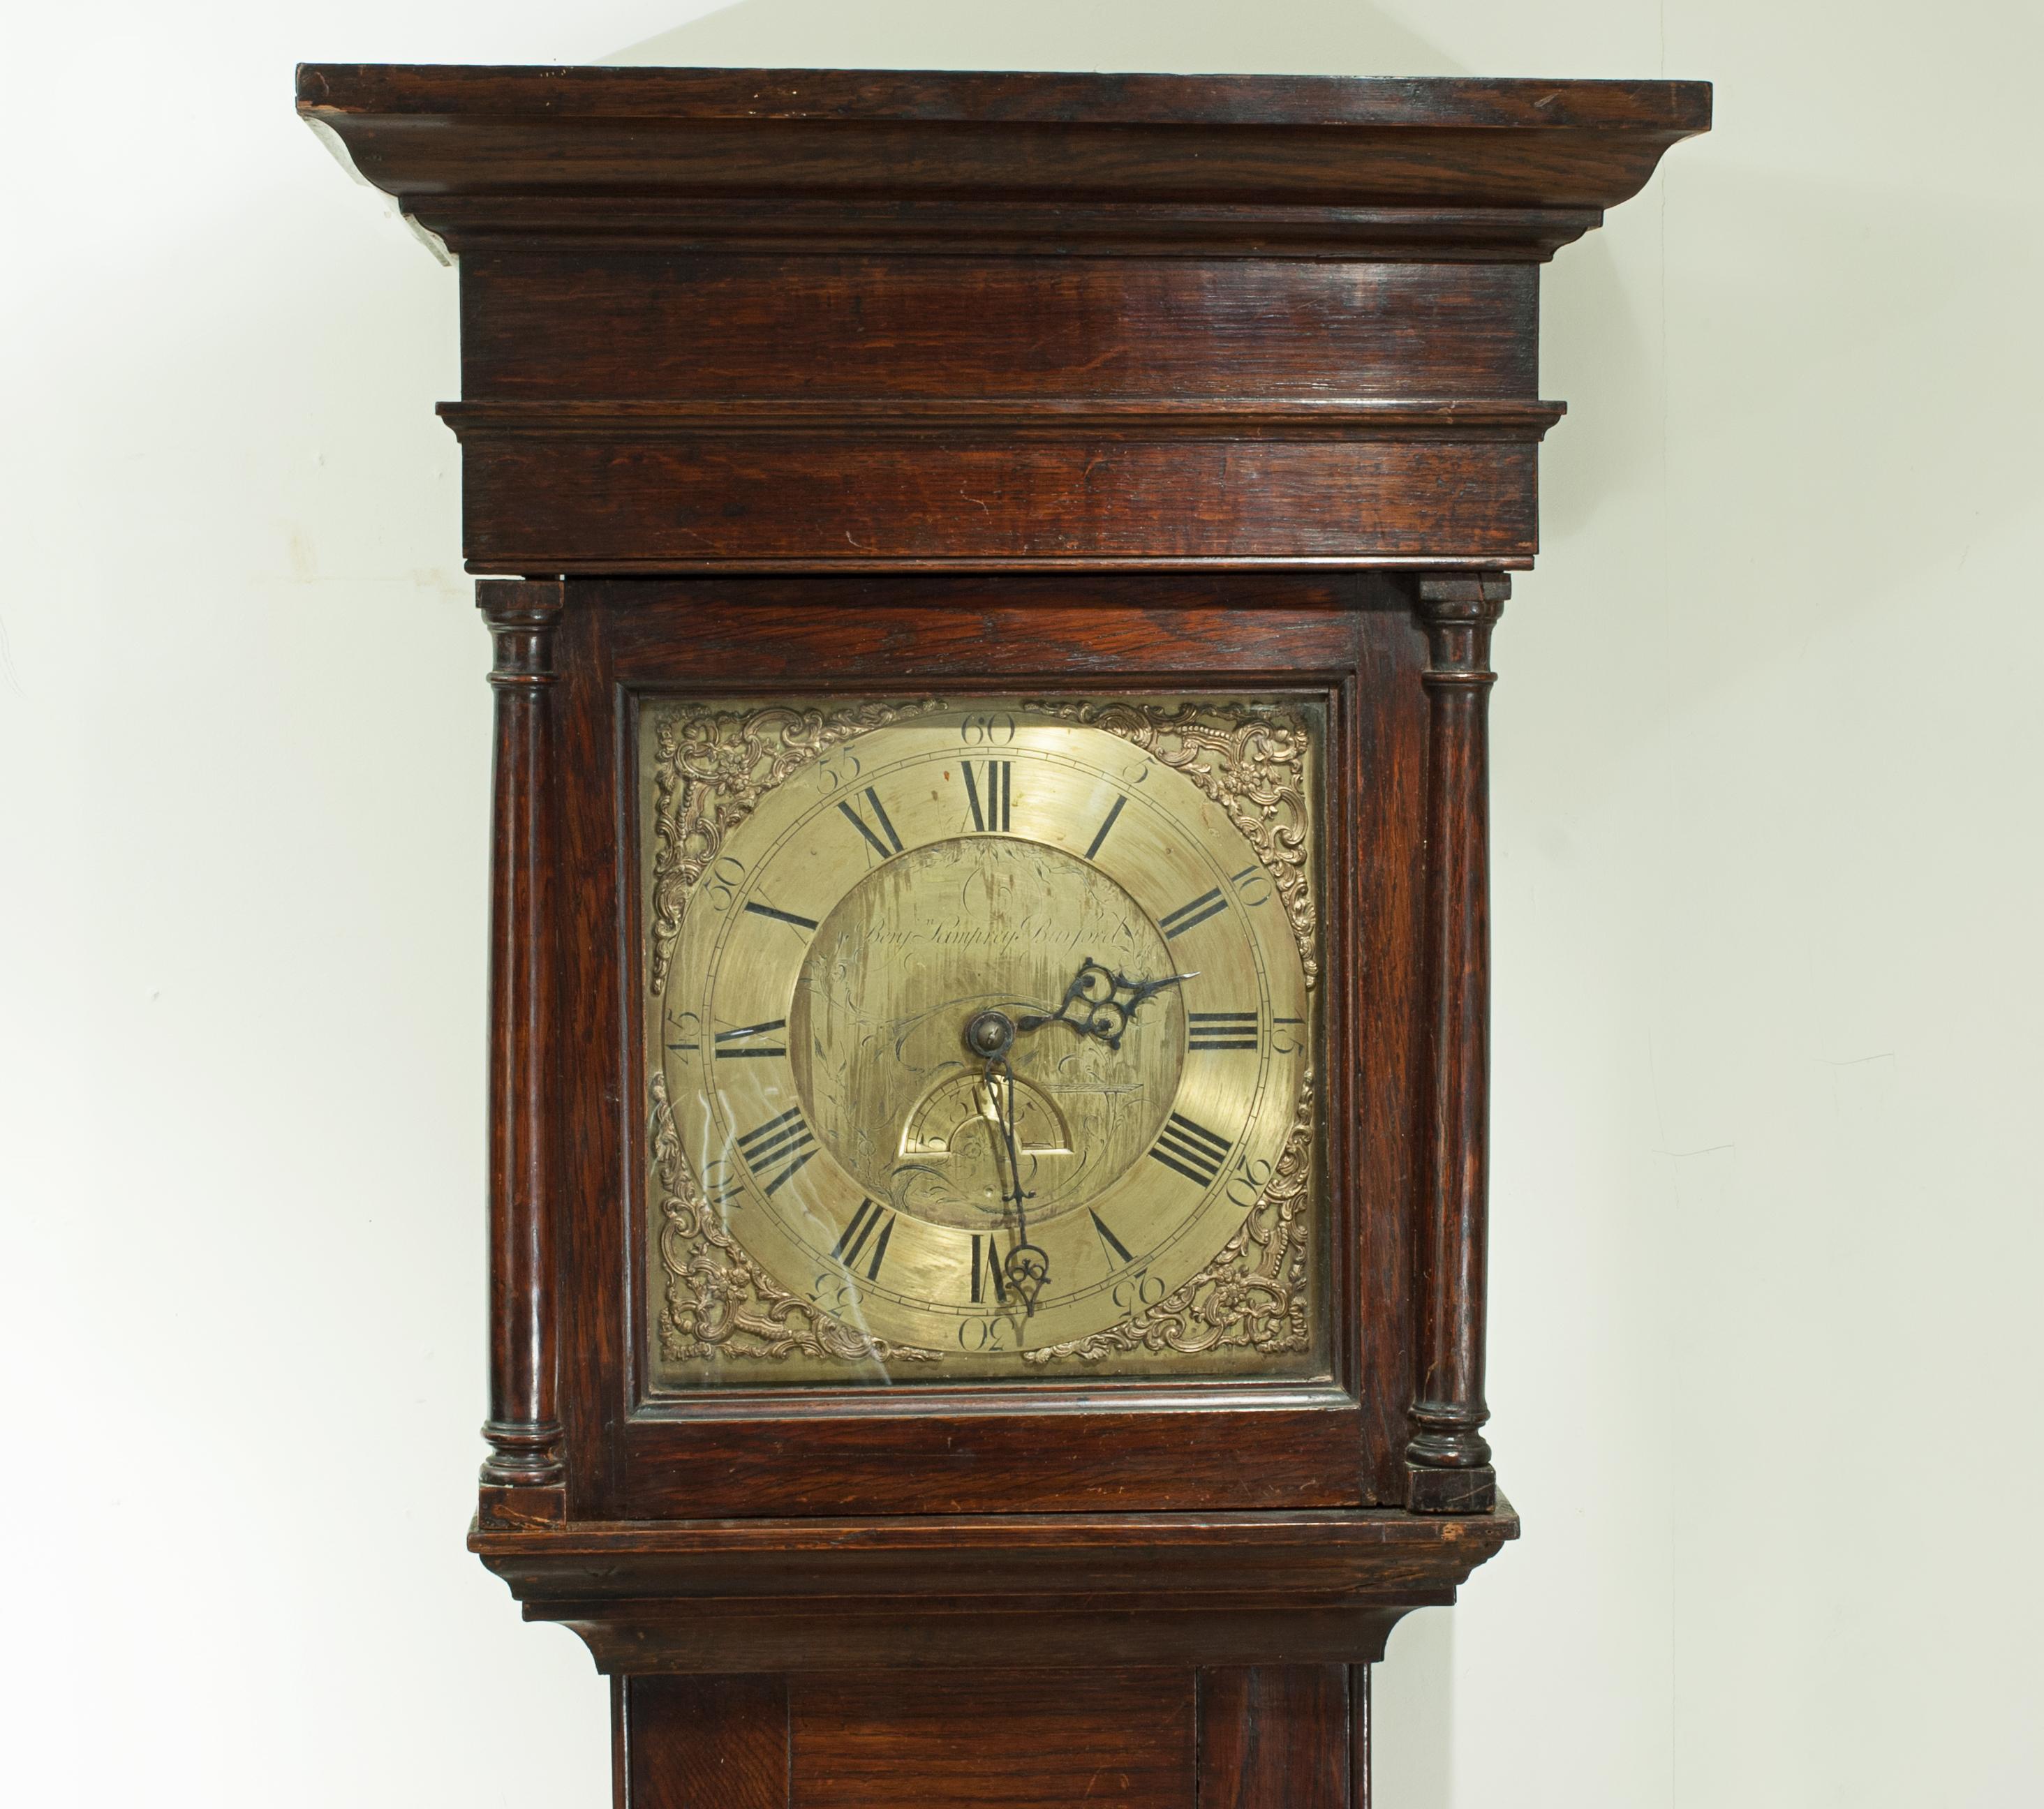 Benjamin Lamprey Long Case Clock.
A wonderful Grandfather clock by the Cotswold clock maker Benjamin Lamprey, Burford. A mid-18th century oak longcase clock with 11-inch square brass dial with black Roman and Arabic numerals, Day of the month